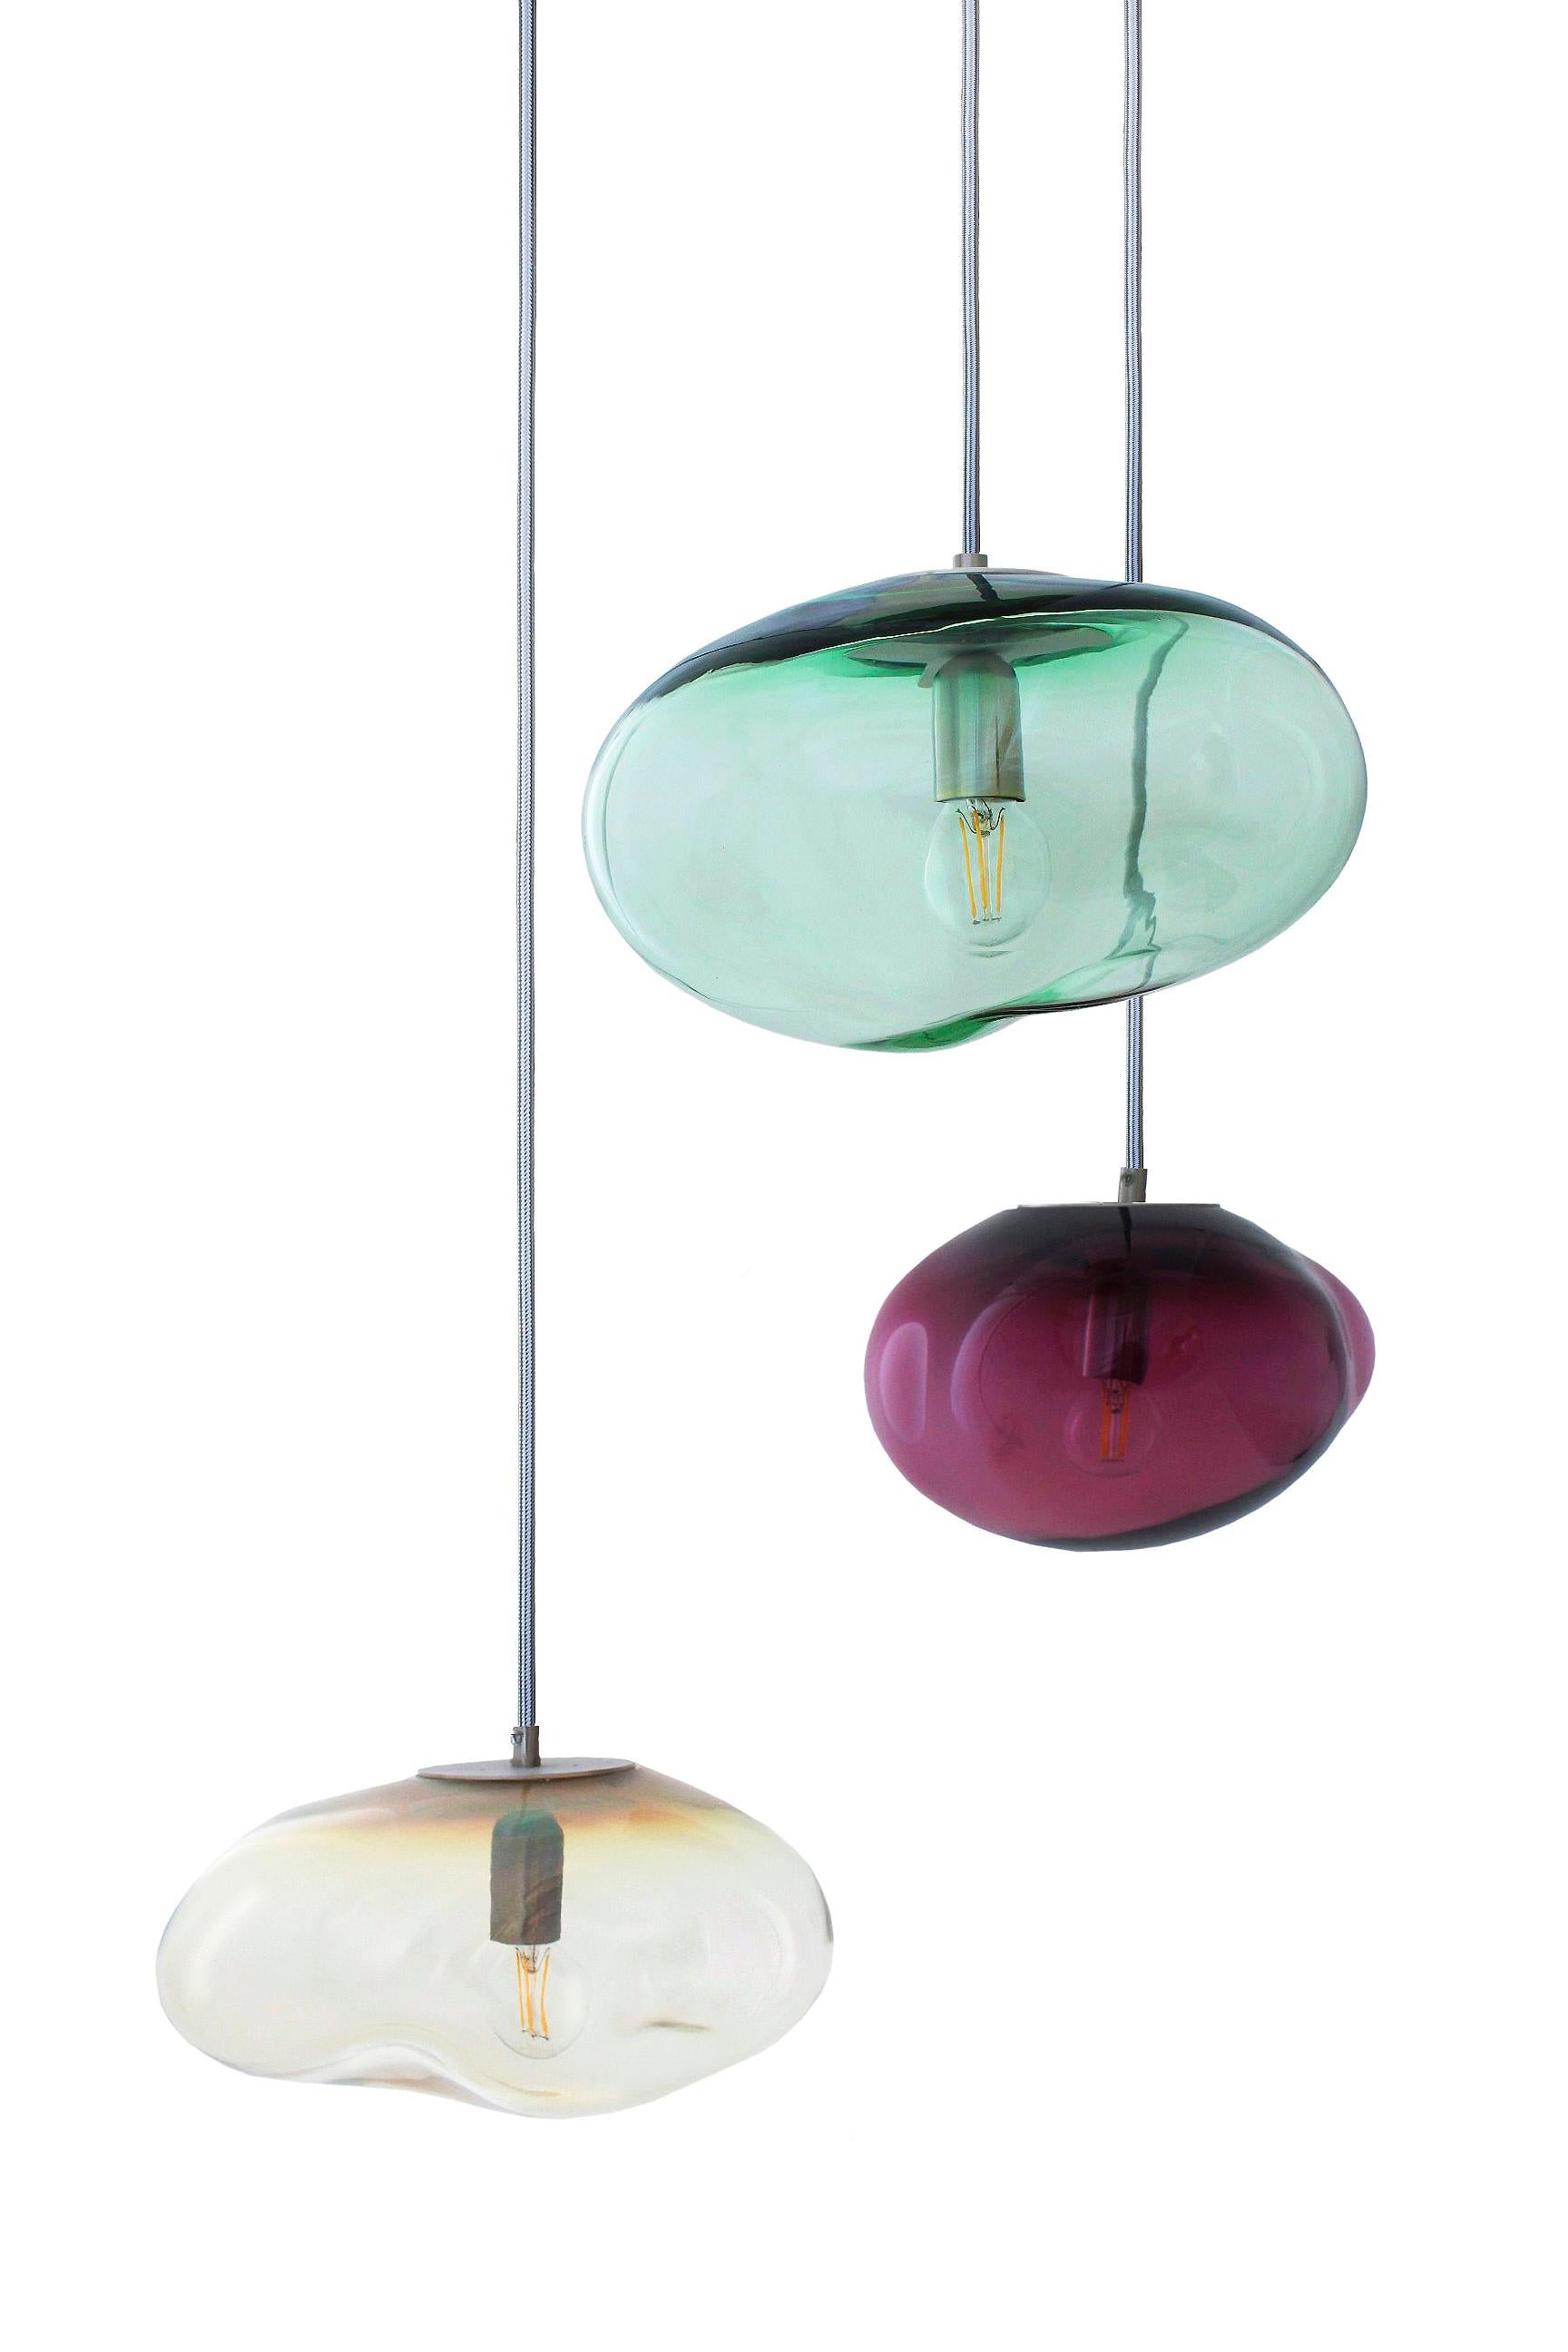 Set of 3 Planetoide pendants by ELOA
No UL listed 
Material: glass, steel, silver, LED bulb
Dimensions: D 30 x W 30 x H 250 cm
Also available in different colours and dimensions.

All our lamps can be wired according to each country. If sold to the